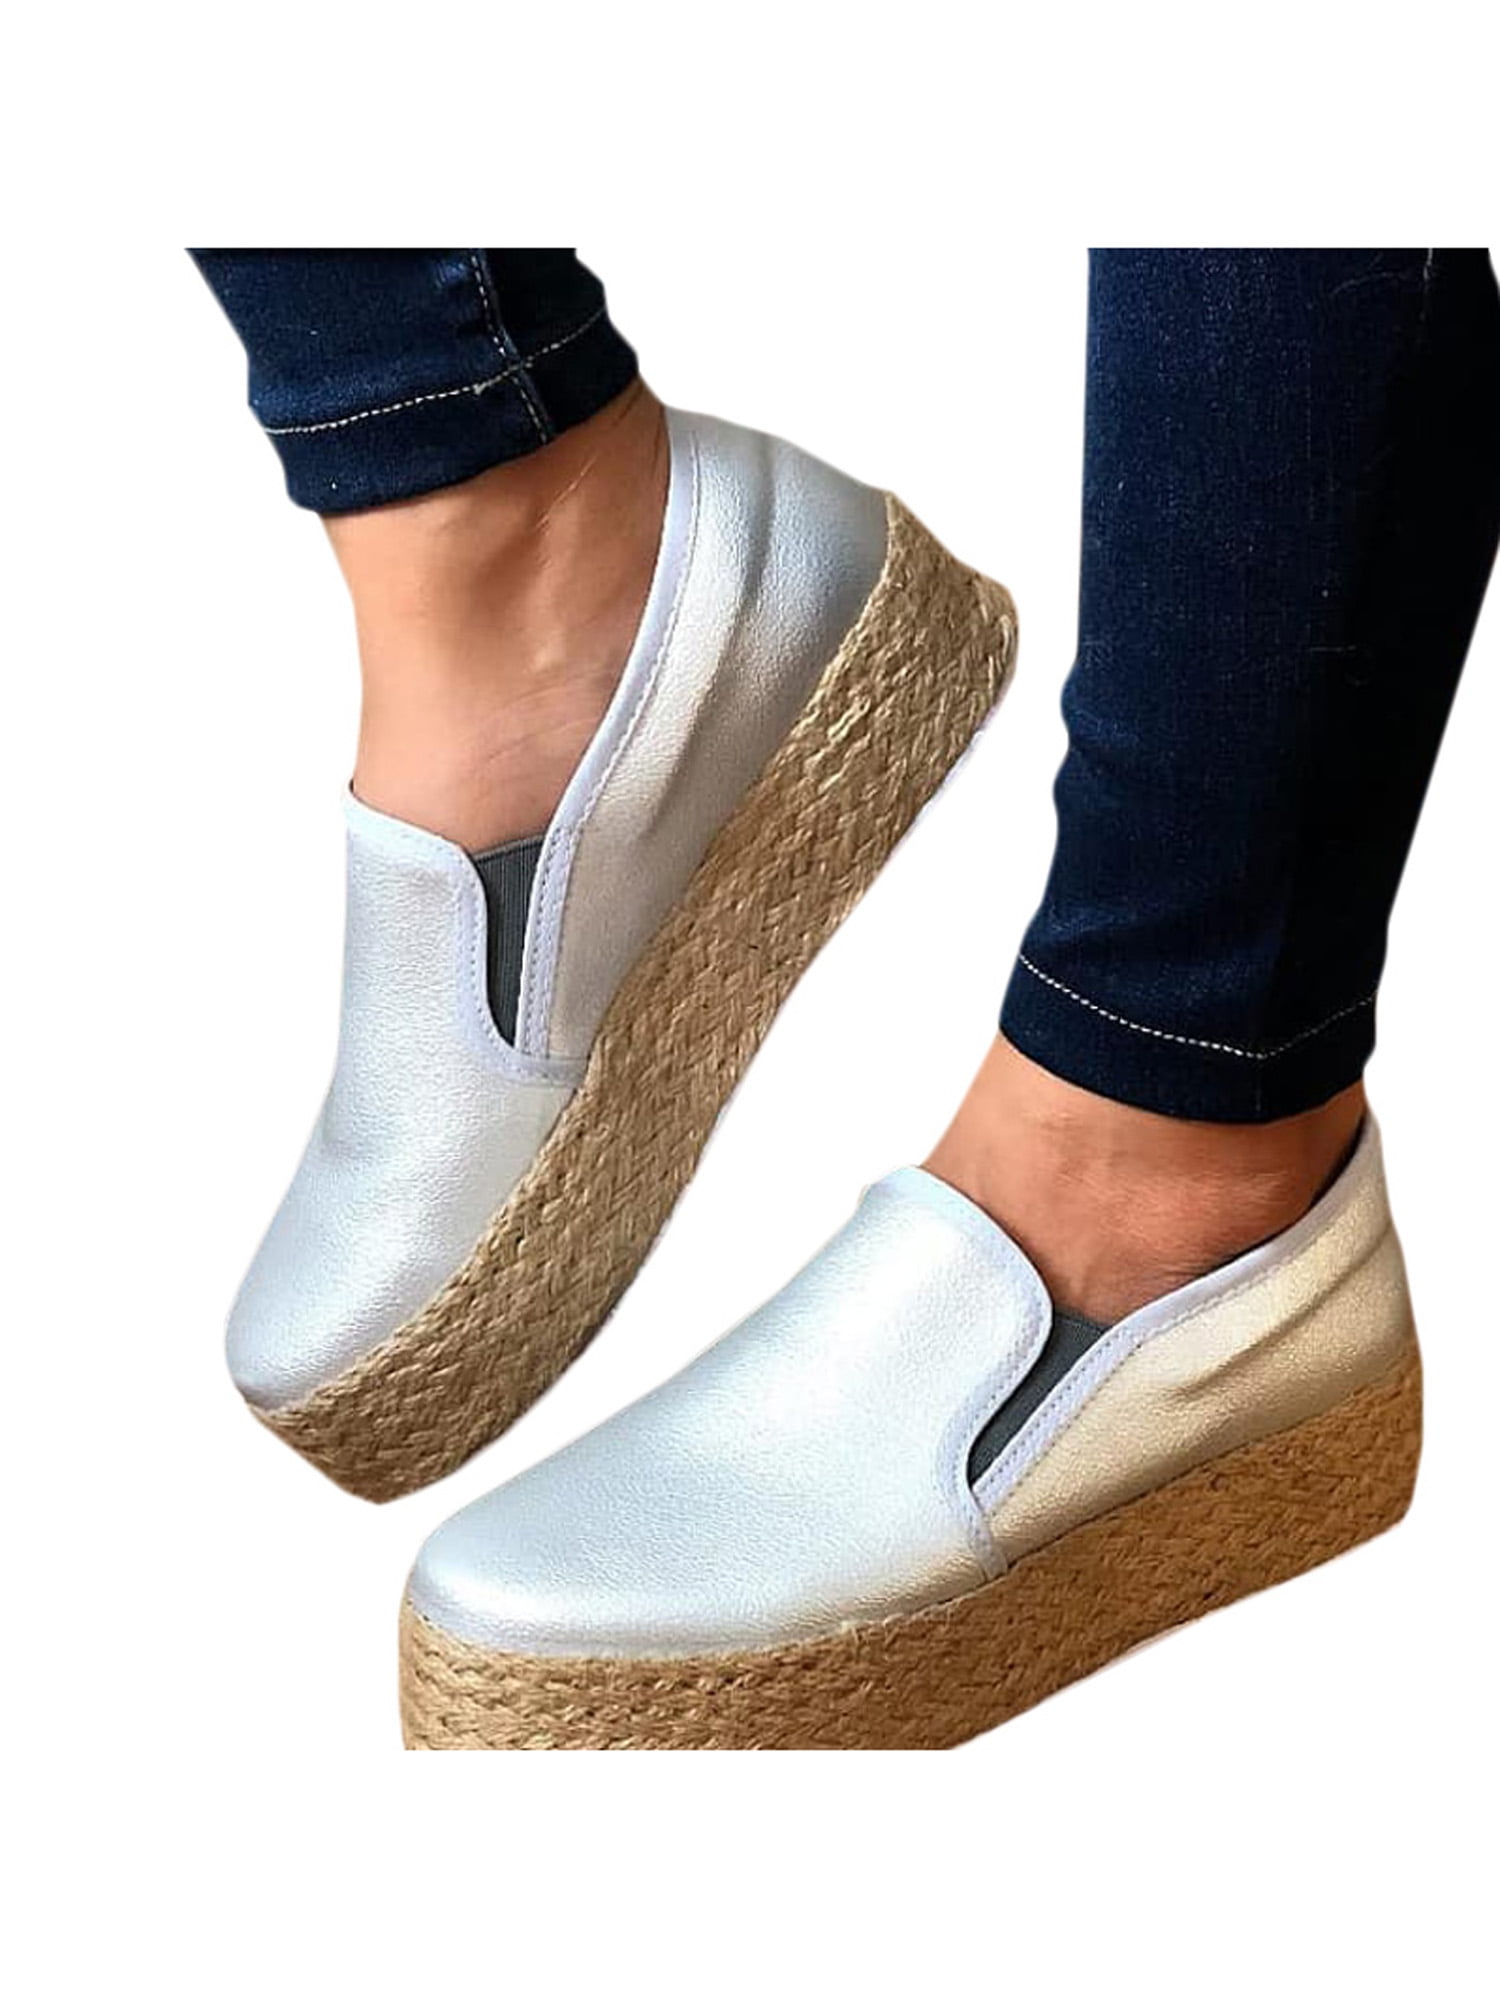 Women's Wedge Heel Shoes Round Toe Platform Slip on Suede Comfy College Loafers 